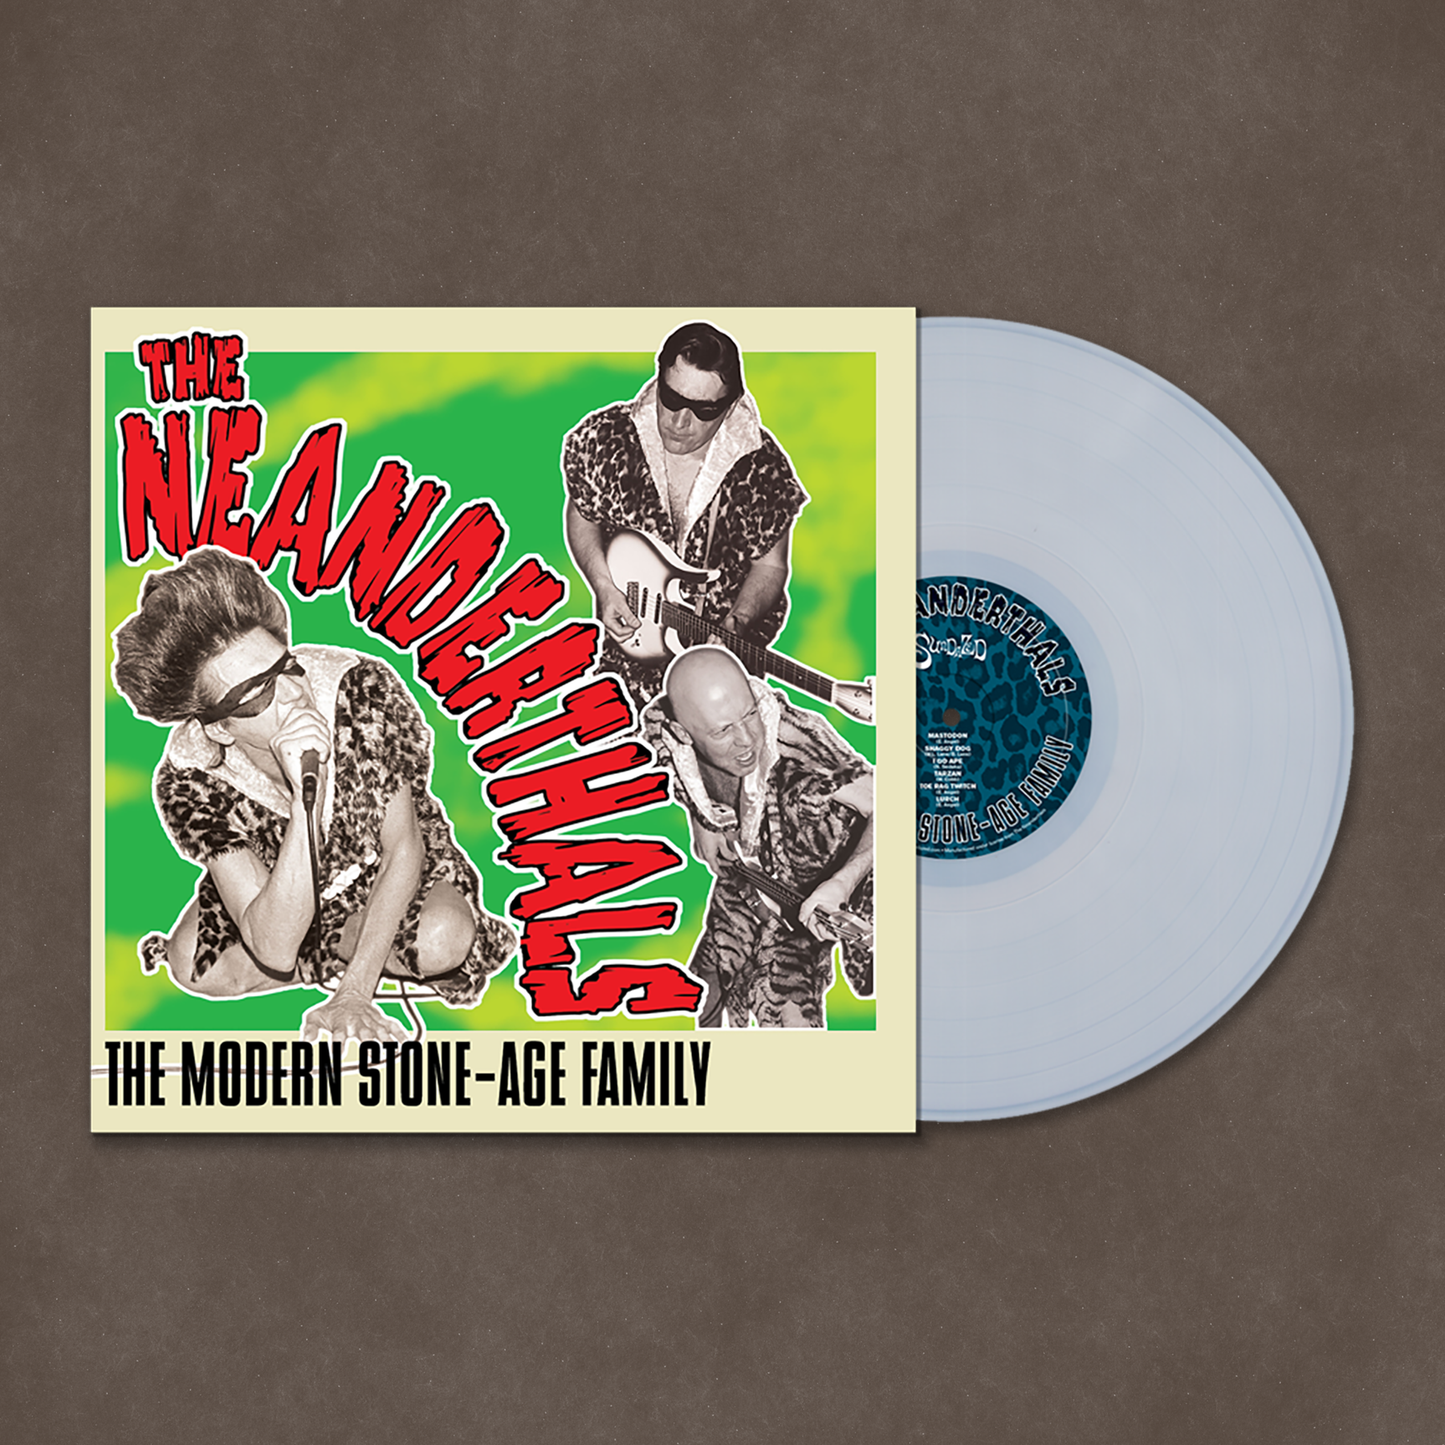 The Neanderthals "The Modern Stone-Age Family" LP